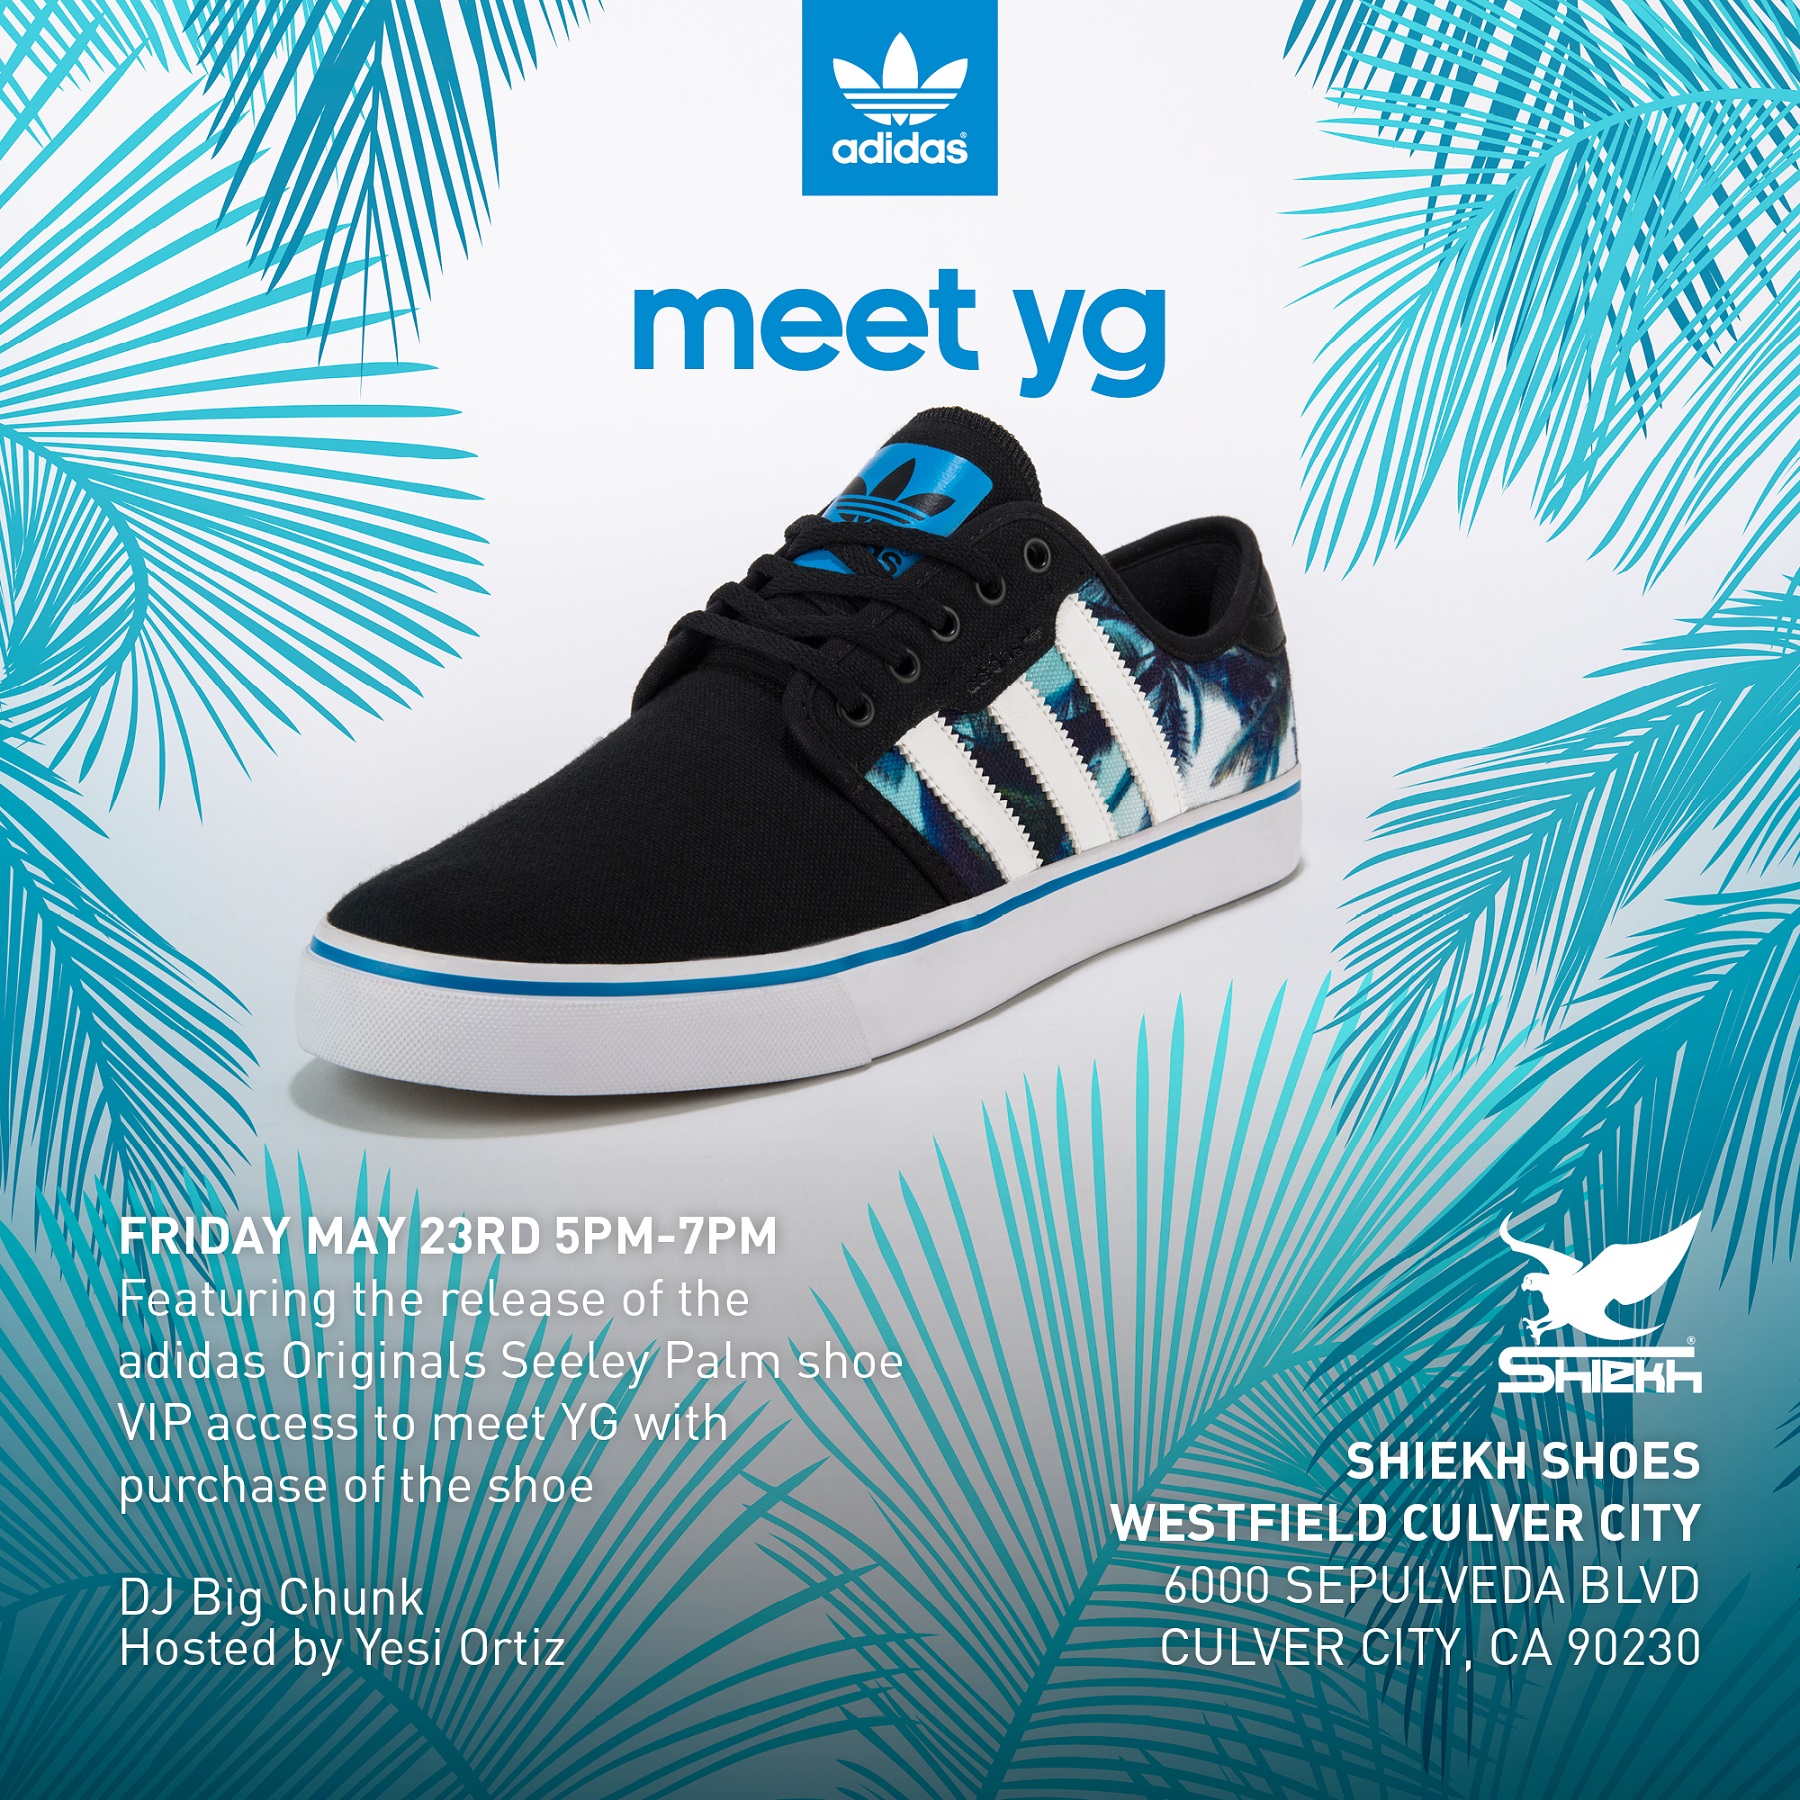 The Shiekh Shoes exclusive Seeley "Palm" by adidas will launch Saturday, May 24, at the Westfield Culver City location.